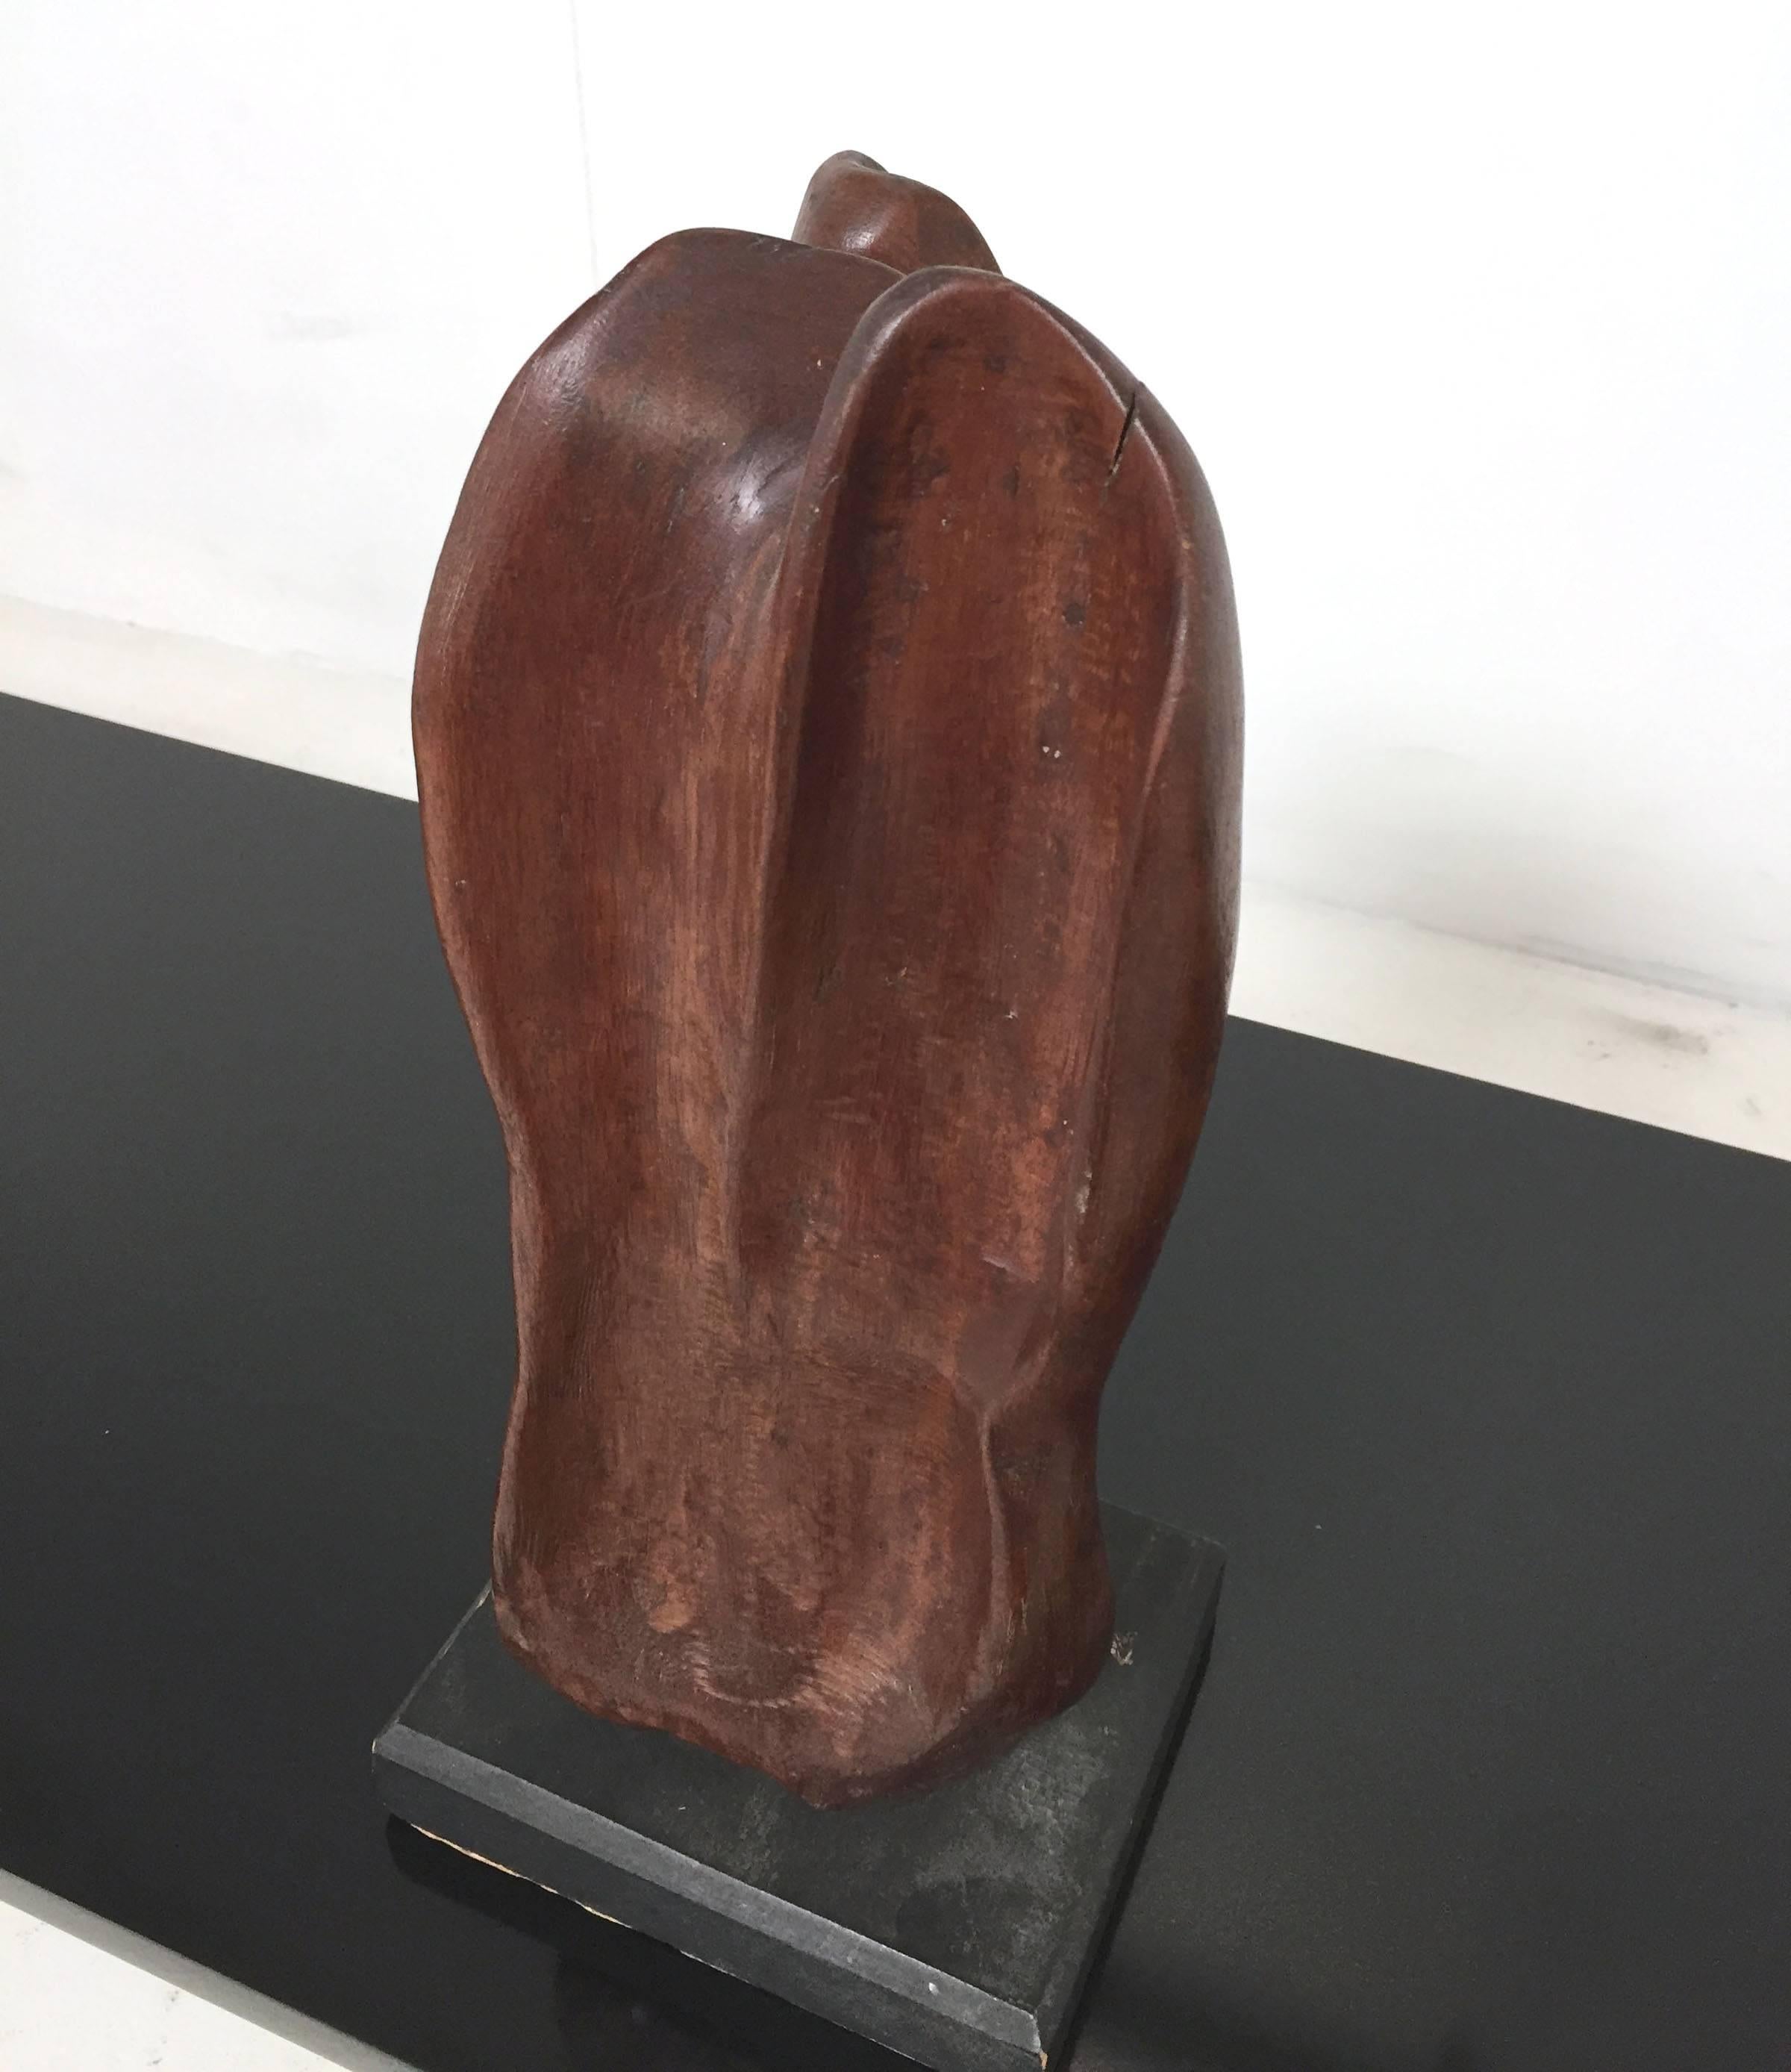 American Abstract Carved Wood Sculpture Titled “Eternal Flame” by Skolnikoff, 1967